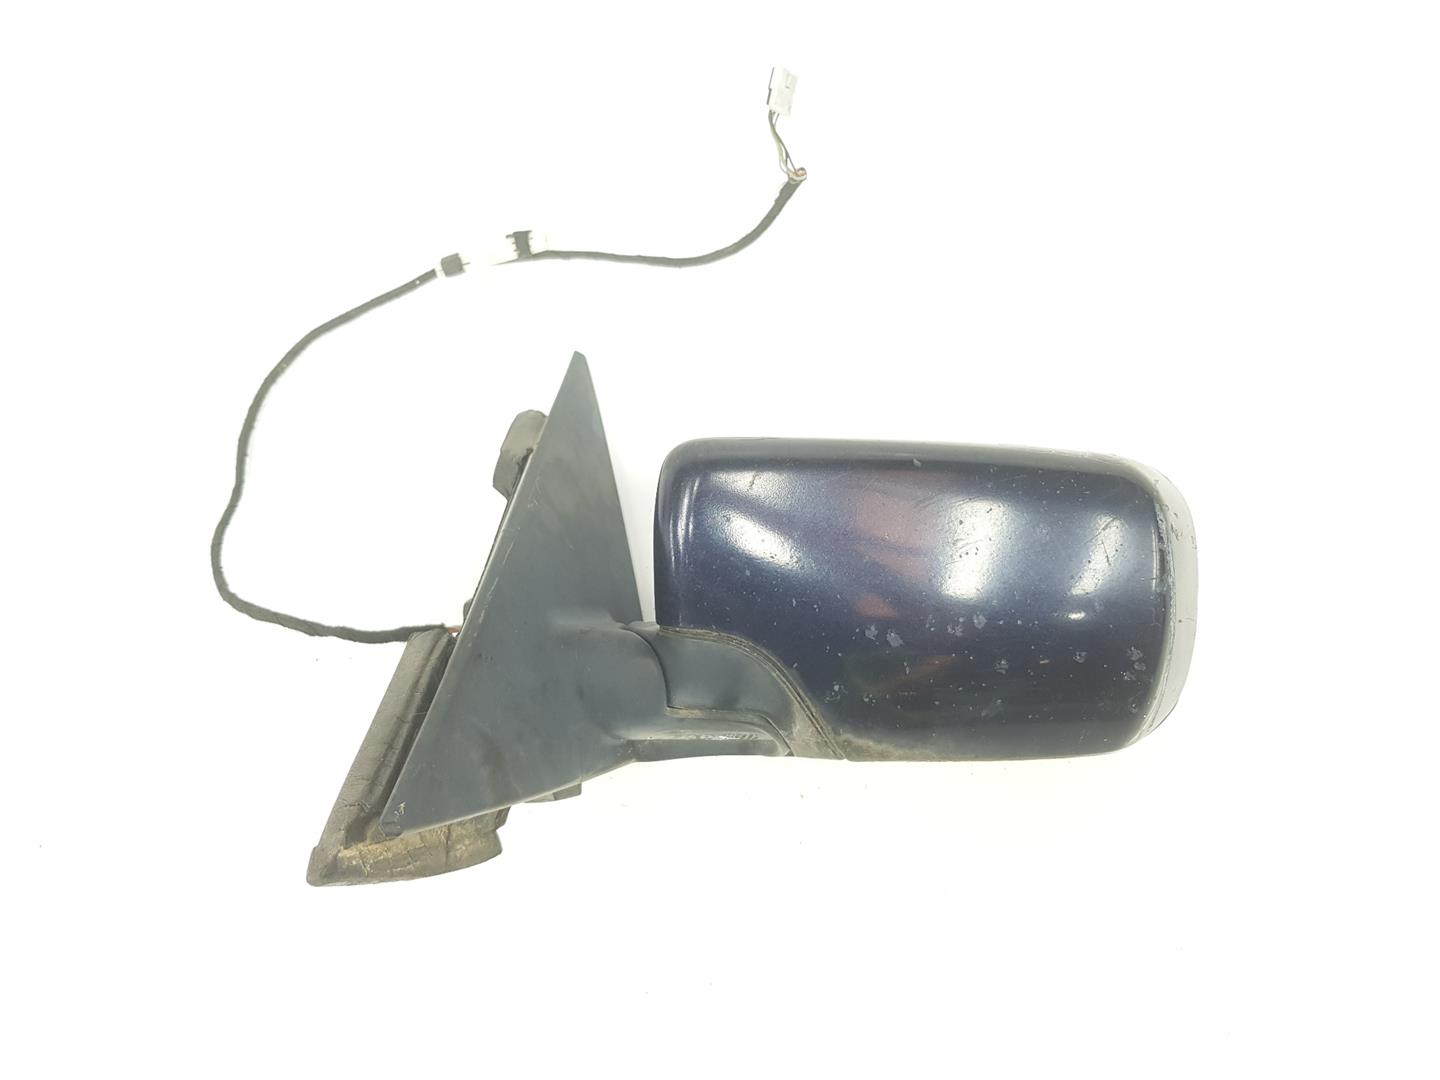 BMW 3 Series E46 (1997-2006) Left Side Wing Mirror 51168245125, 51168245125, AZUL317 21404552